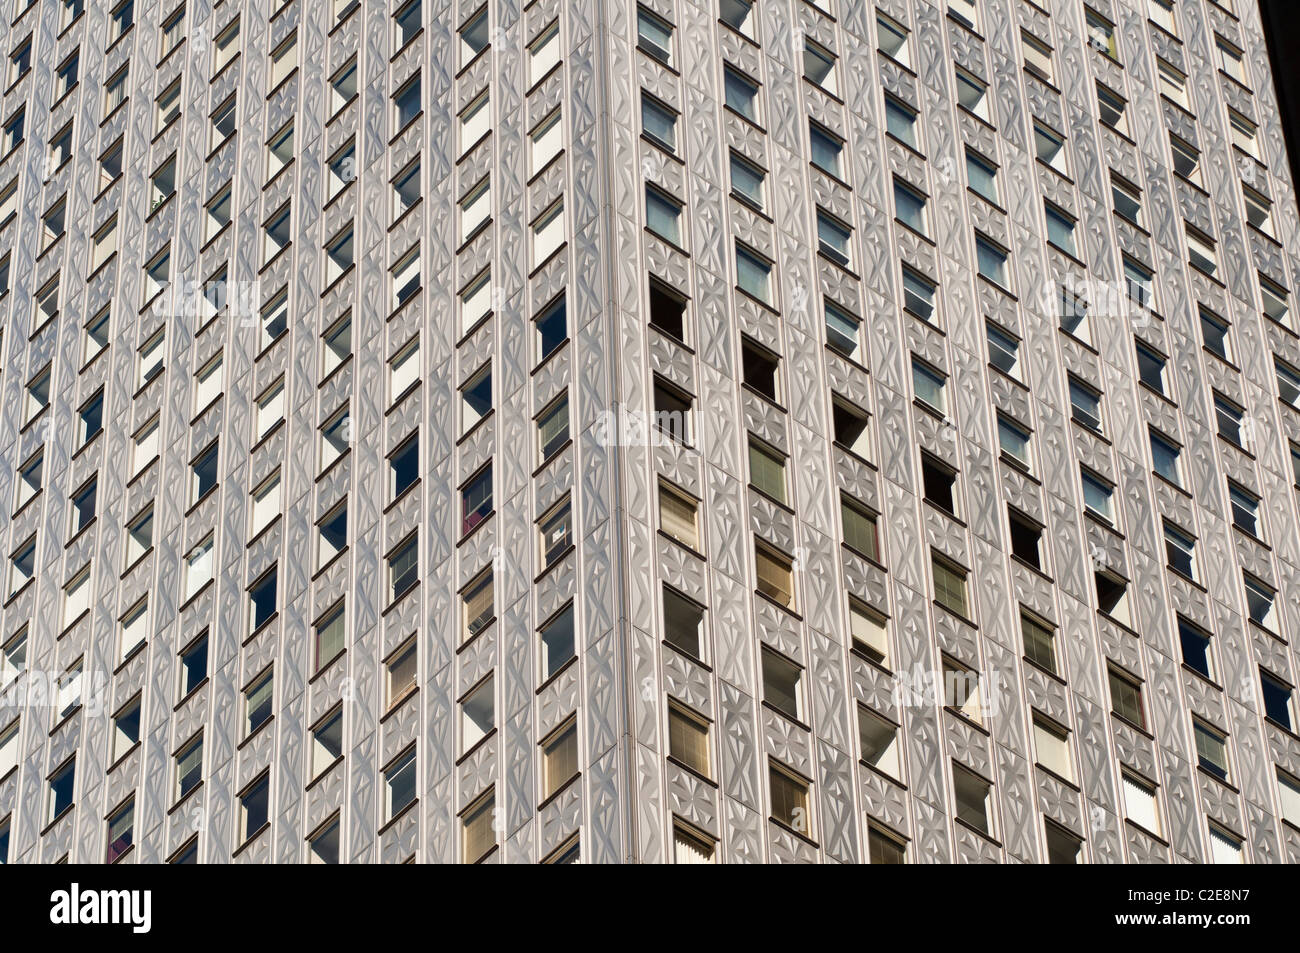 Steel, stainless, self cleaning geometrical pattern facade of Mobil Building, Manhattan, New York City, USA Stock Photo